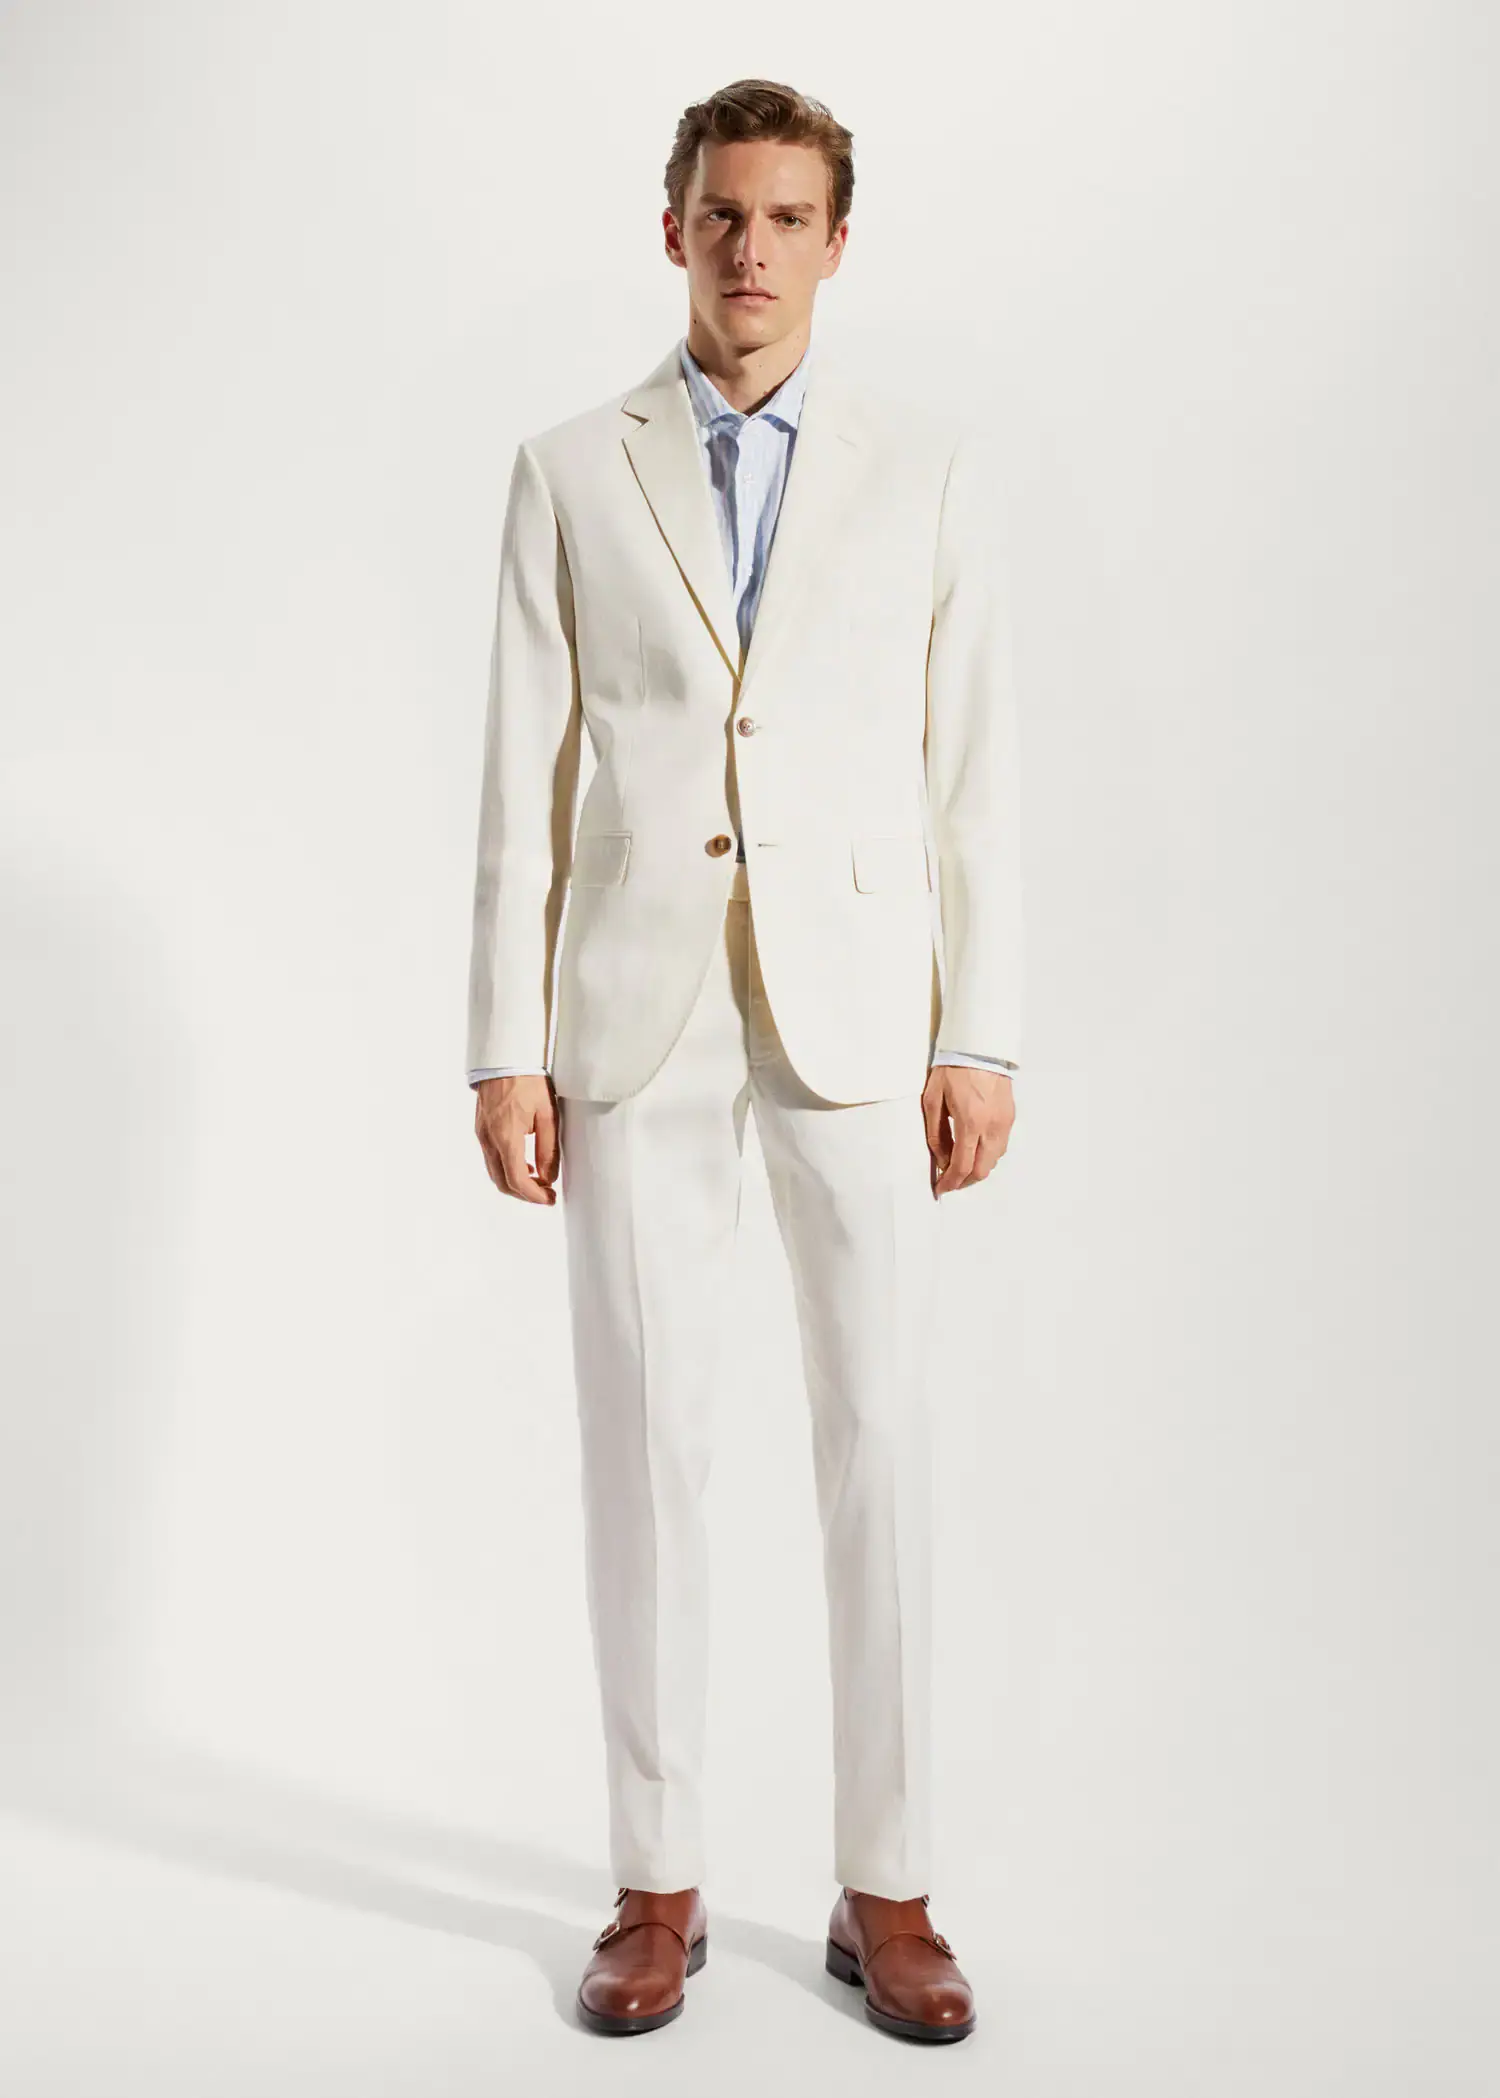 Mango 100% linen suit blazer. a man in a white suit standing in front of a white wall. 